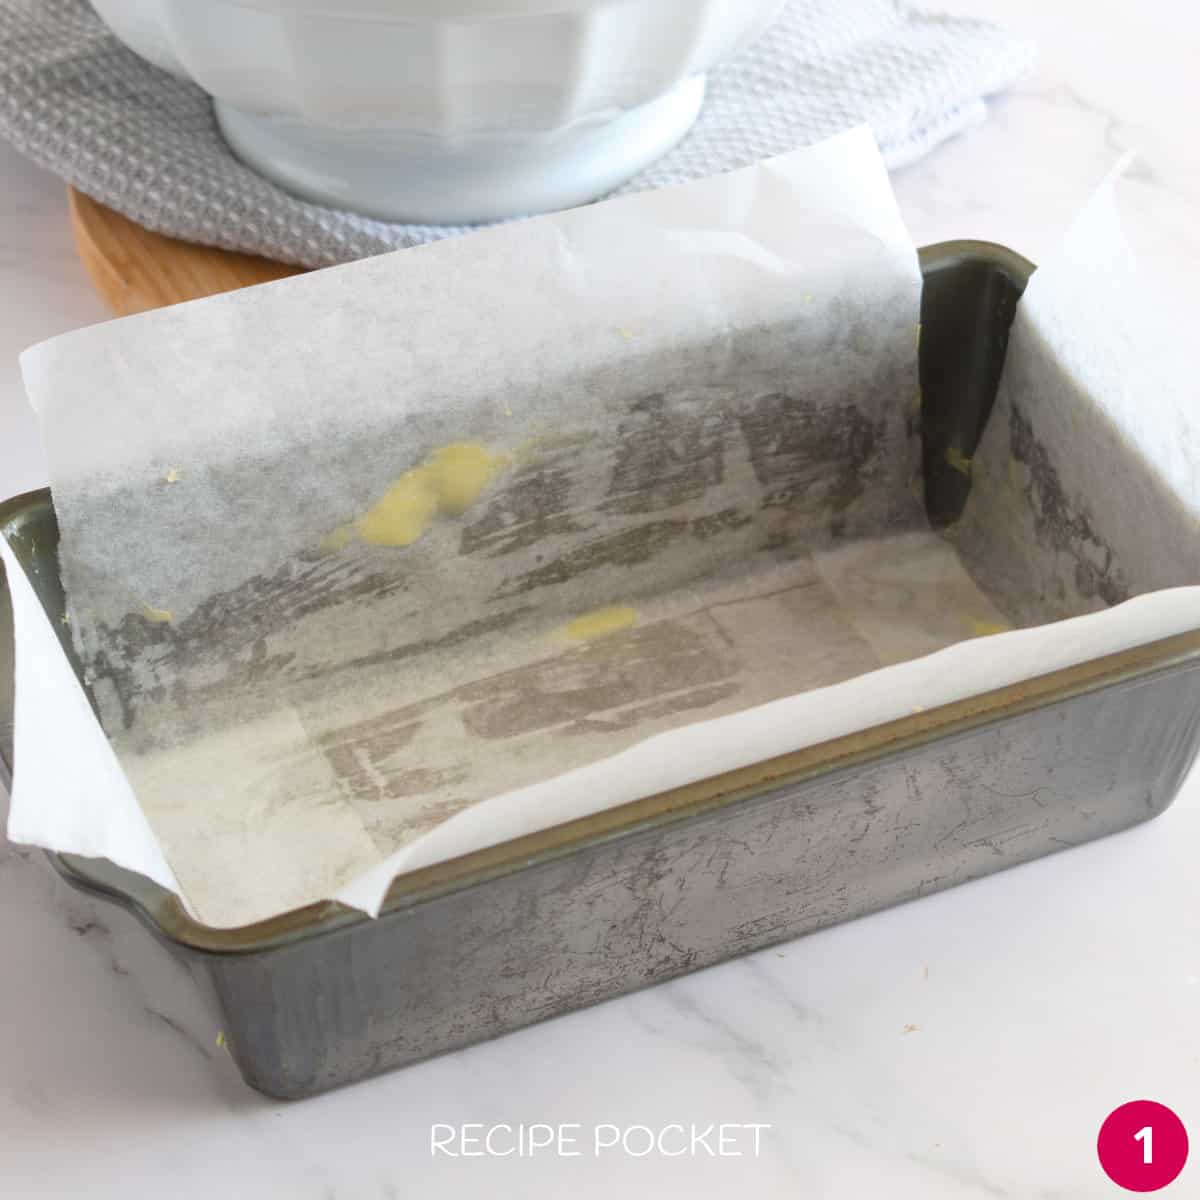 A baking tin lined with baking paper.